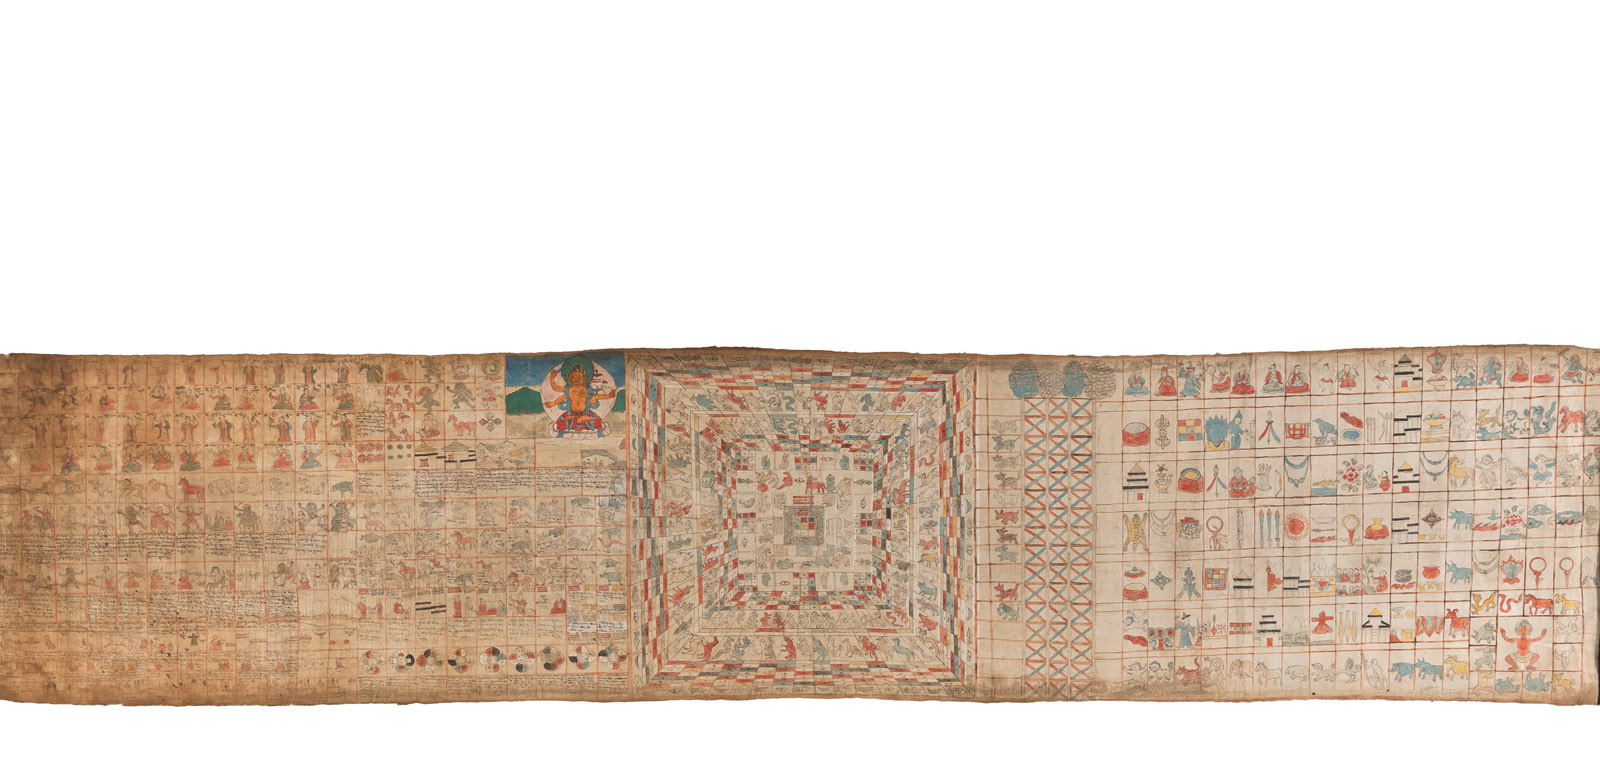 <b>A RARE ASTROLOGICAL HANDSCROLL FOR DETERMING KARMIC FAVORABLE AND UNFAVORABLE DATES</b>